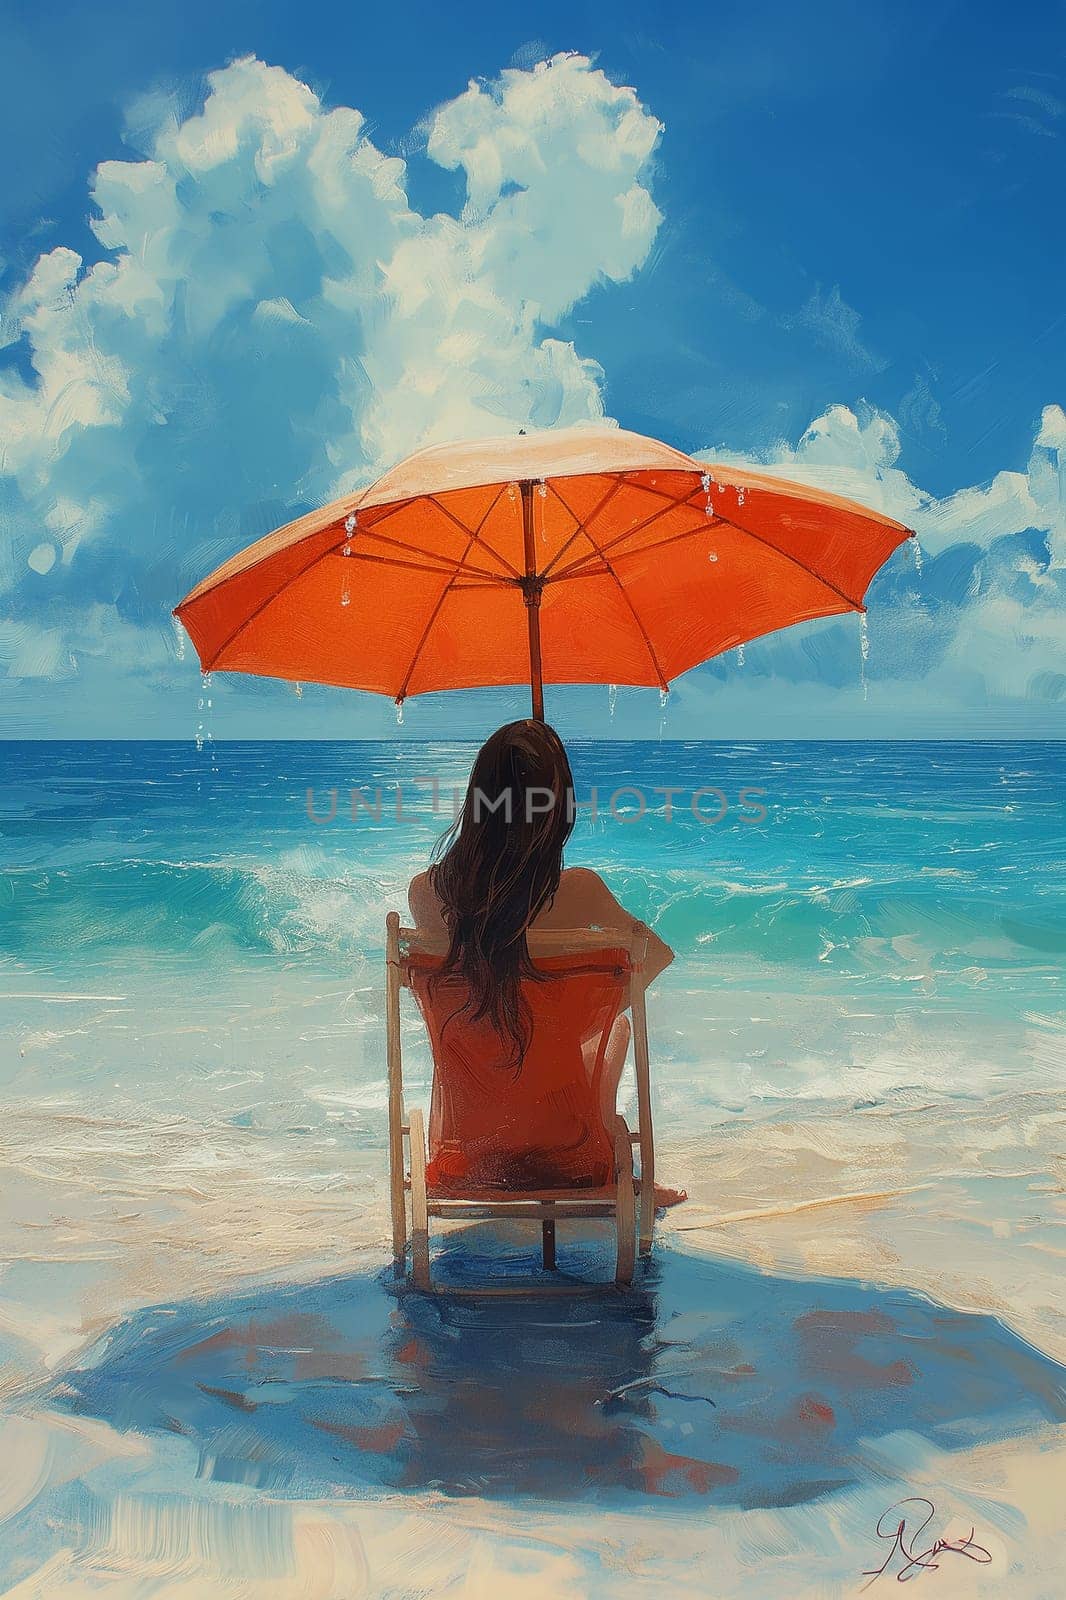 A person relaxes under an orange umbrella by a serene blue ocean with white clouds above. by Hype2art